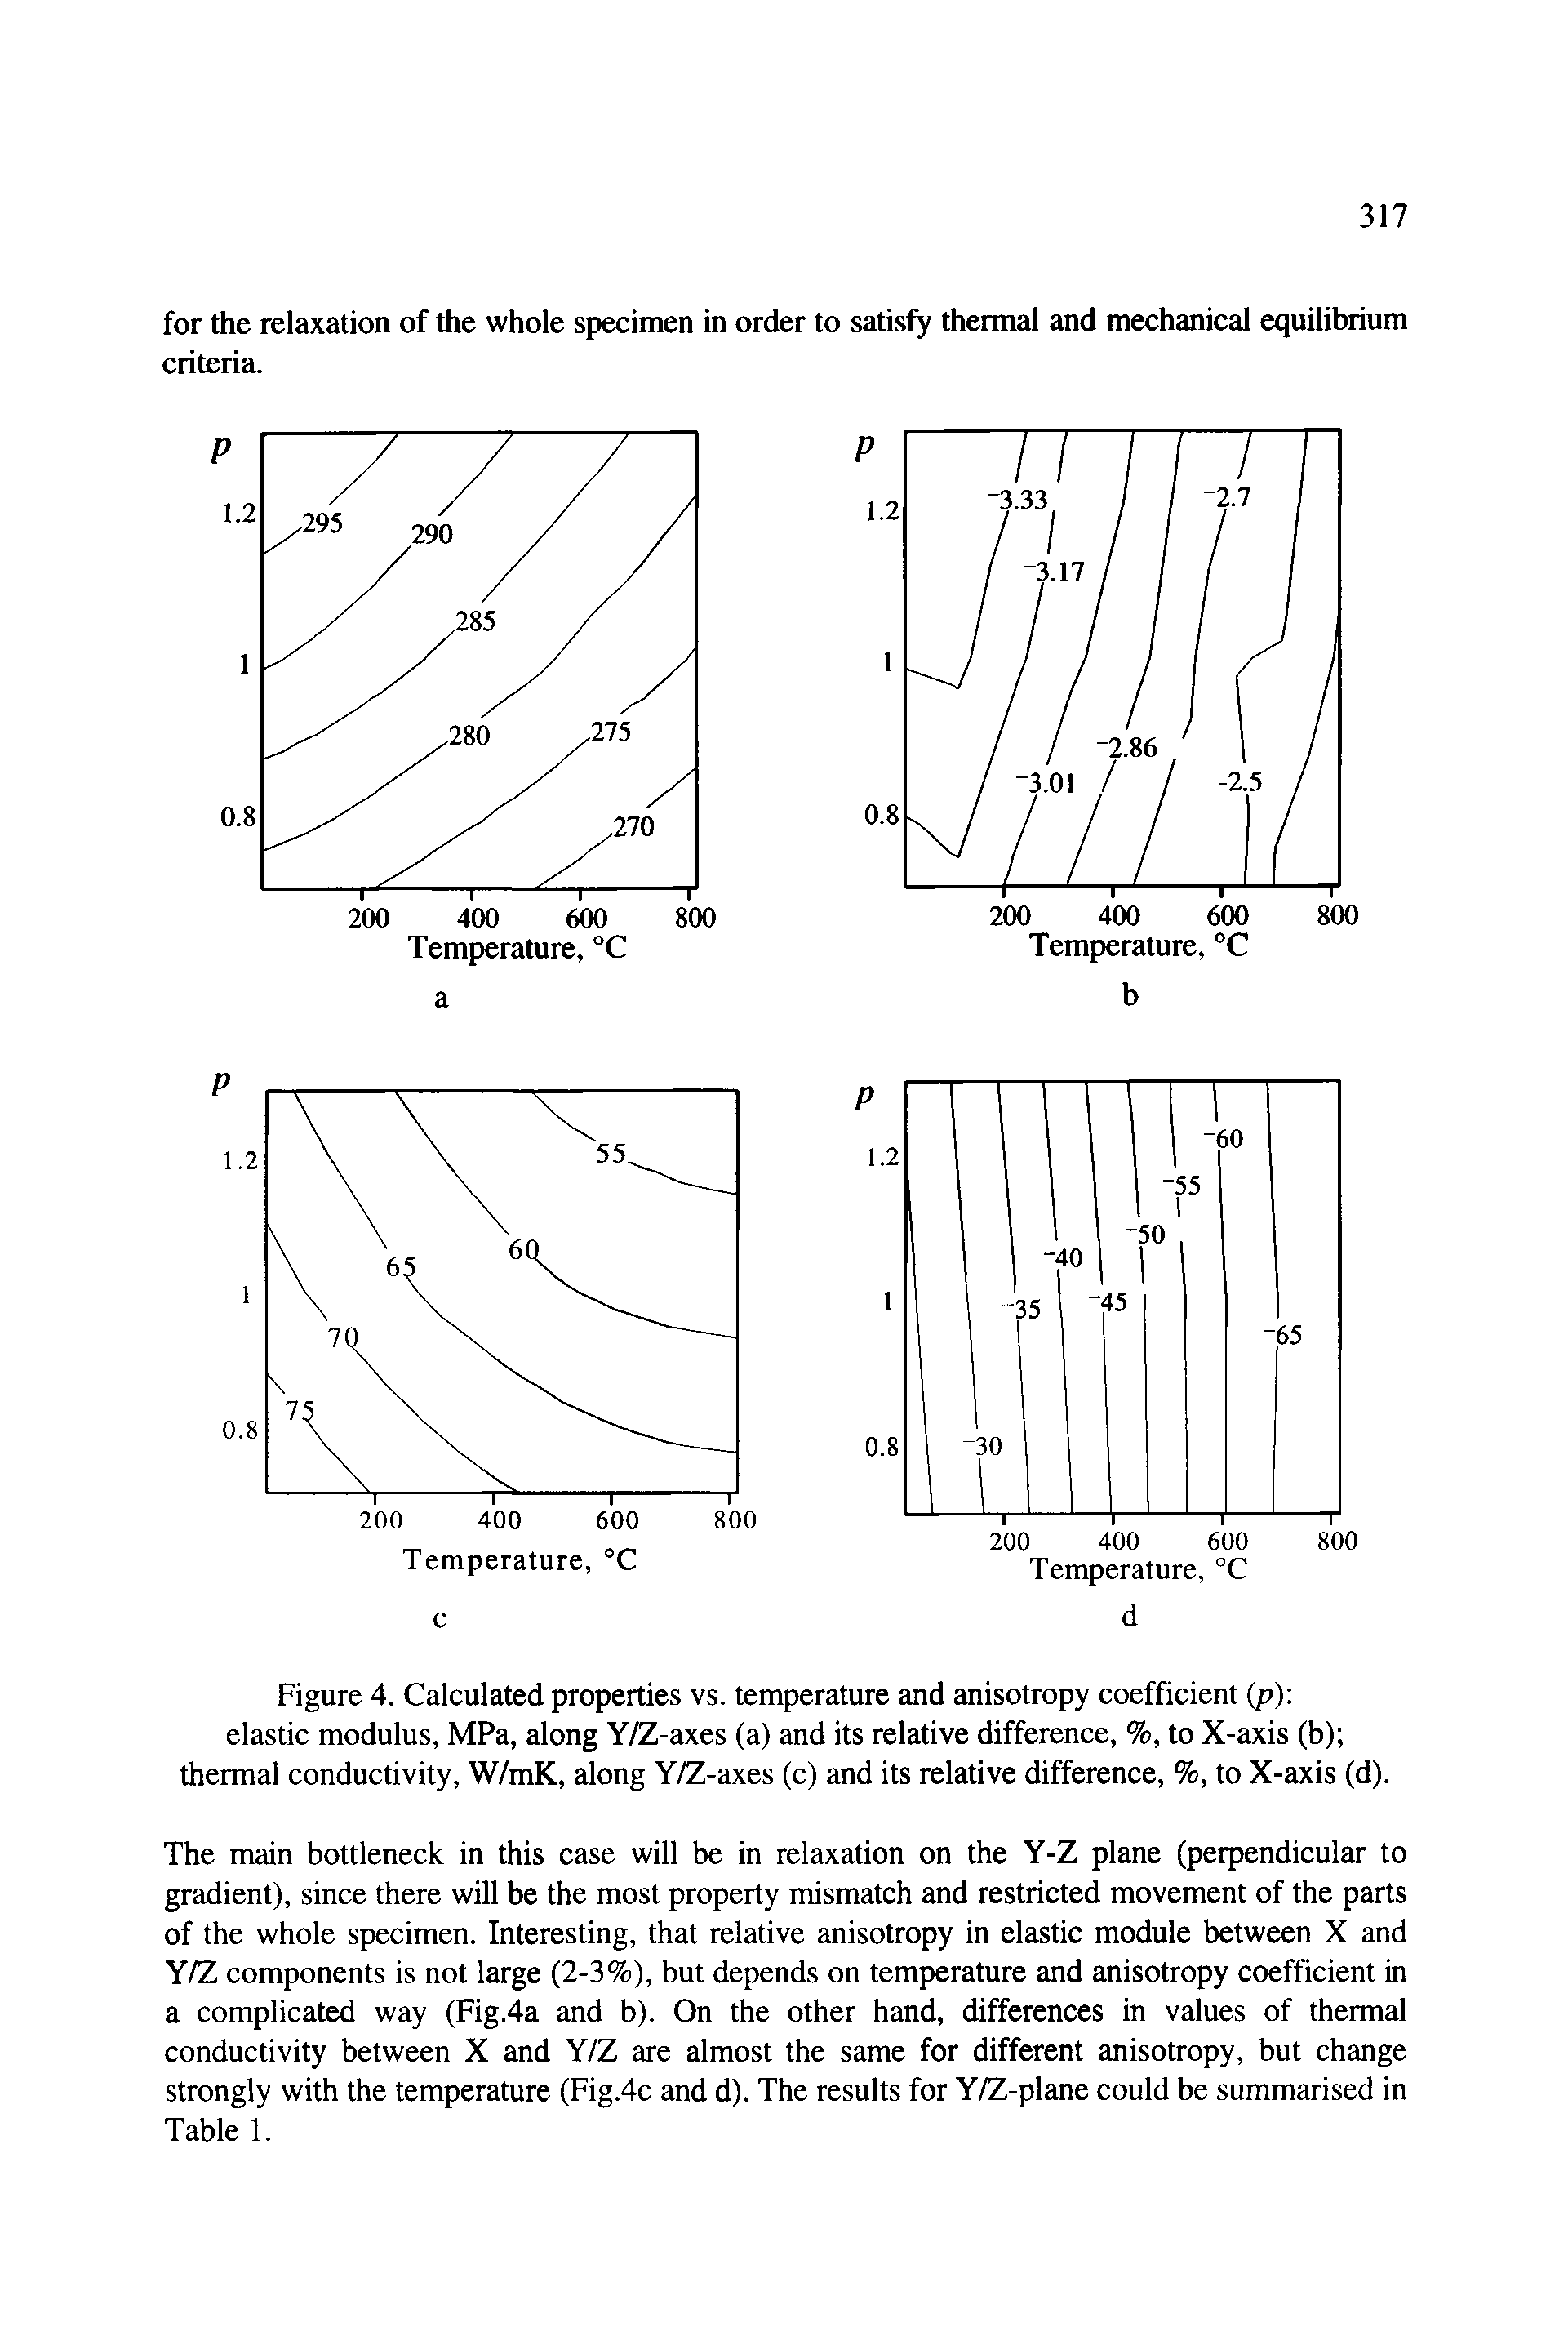 Figure 4. Calculated properties vs. temperature and anisotropy coefficient (p) elastic modulus, MPa, along Y/Z-axes (a) and its relative difference, %, to X-axis (b) thermal conductivity, W/mK, along Y/Z-axes (c) and its relative difference, %, to X-axis (d).